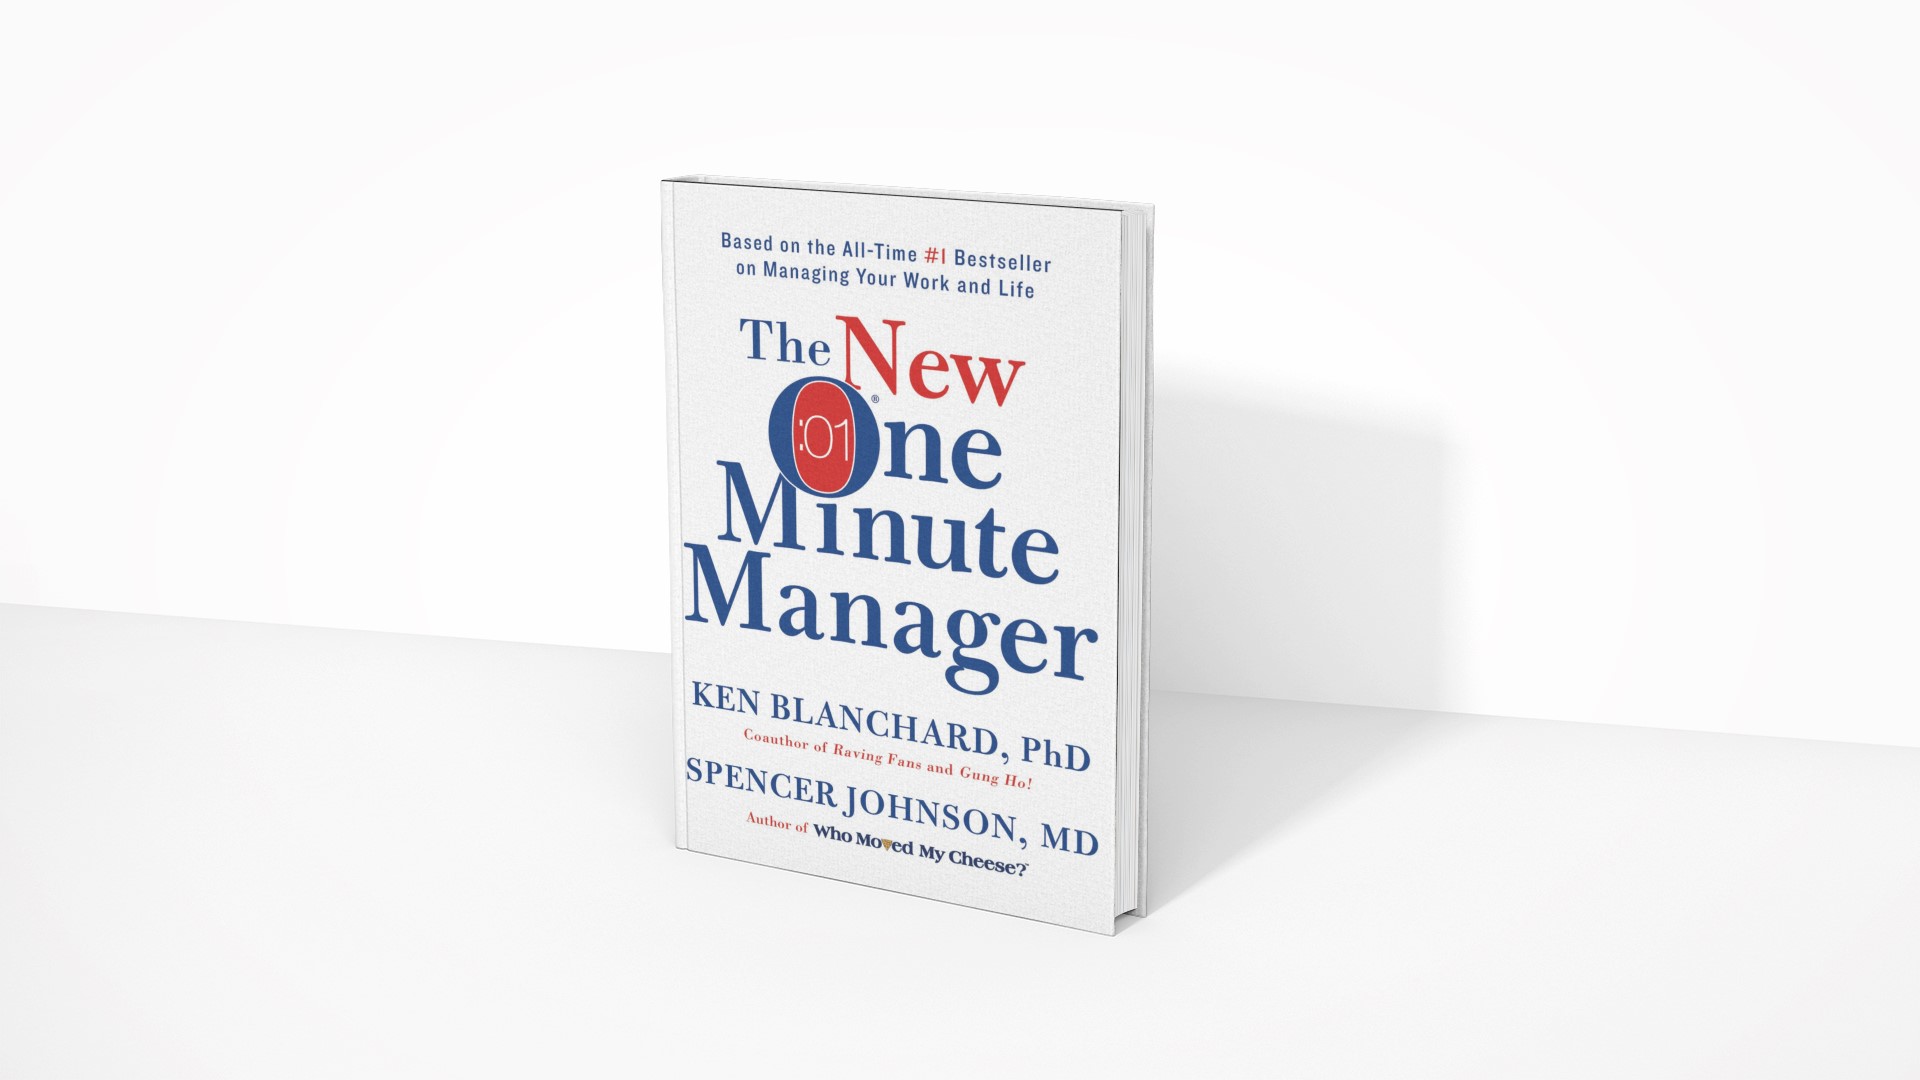 The One Minute Manager - Ken Blanchard and Spencer Johnson